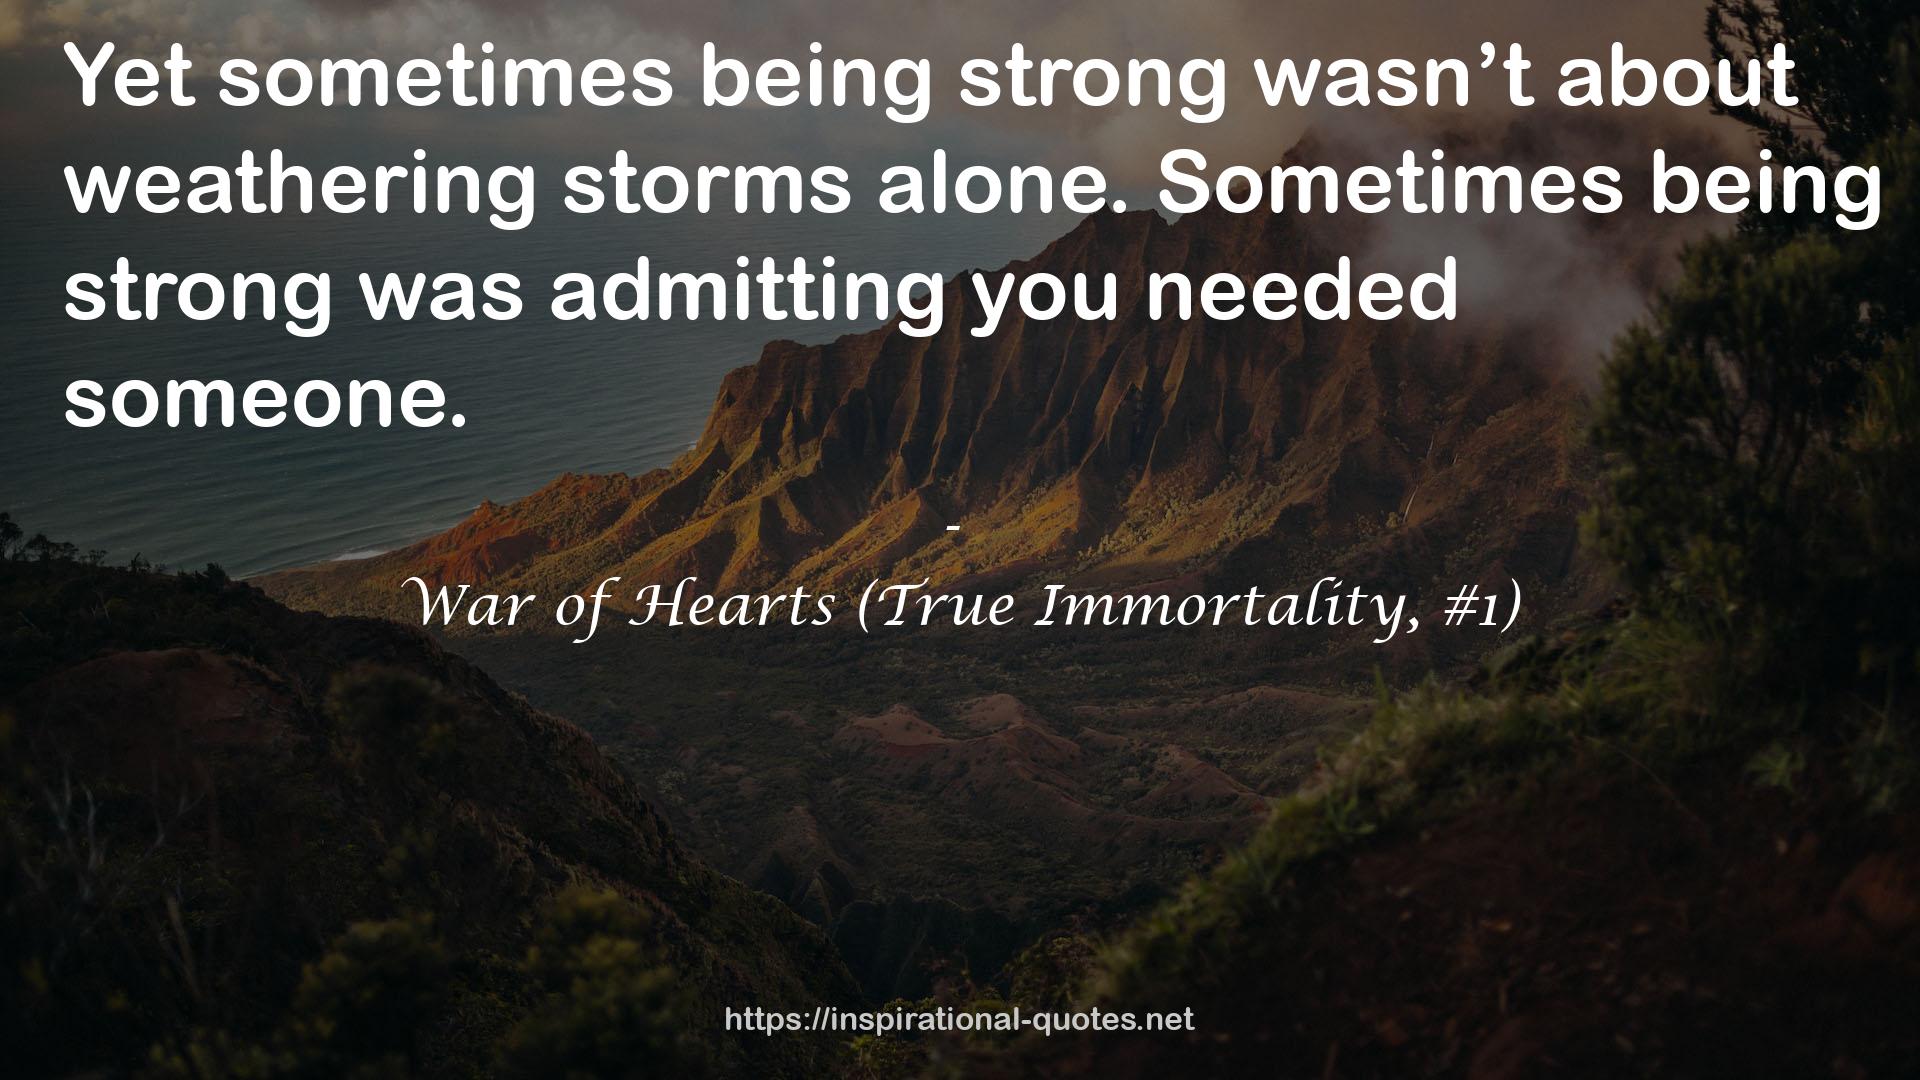 War of Hearts (True Immortality, #1) QUOTES